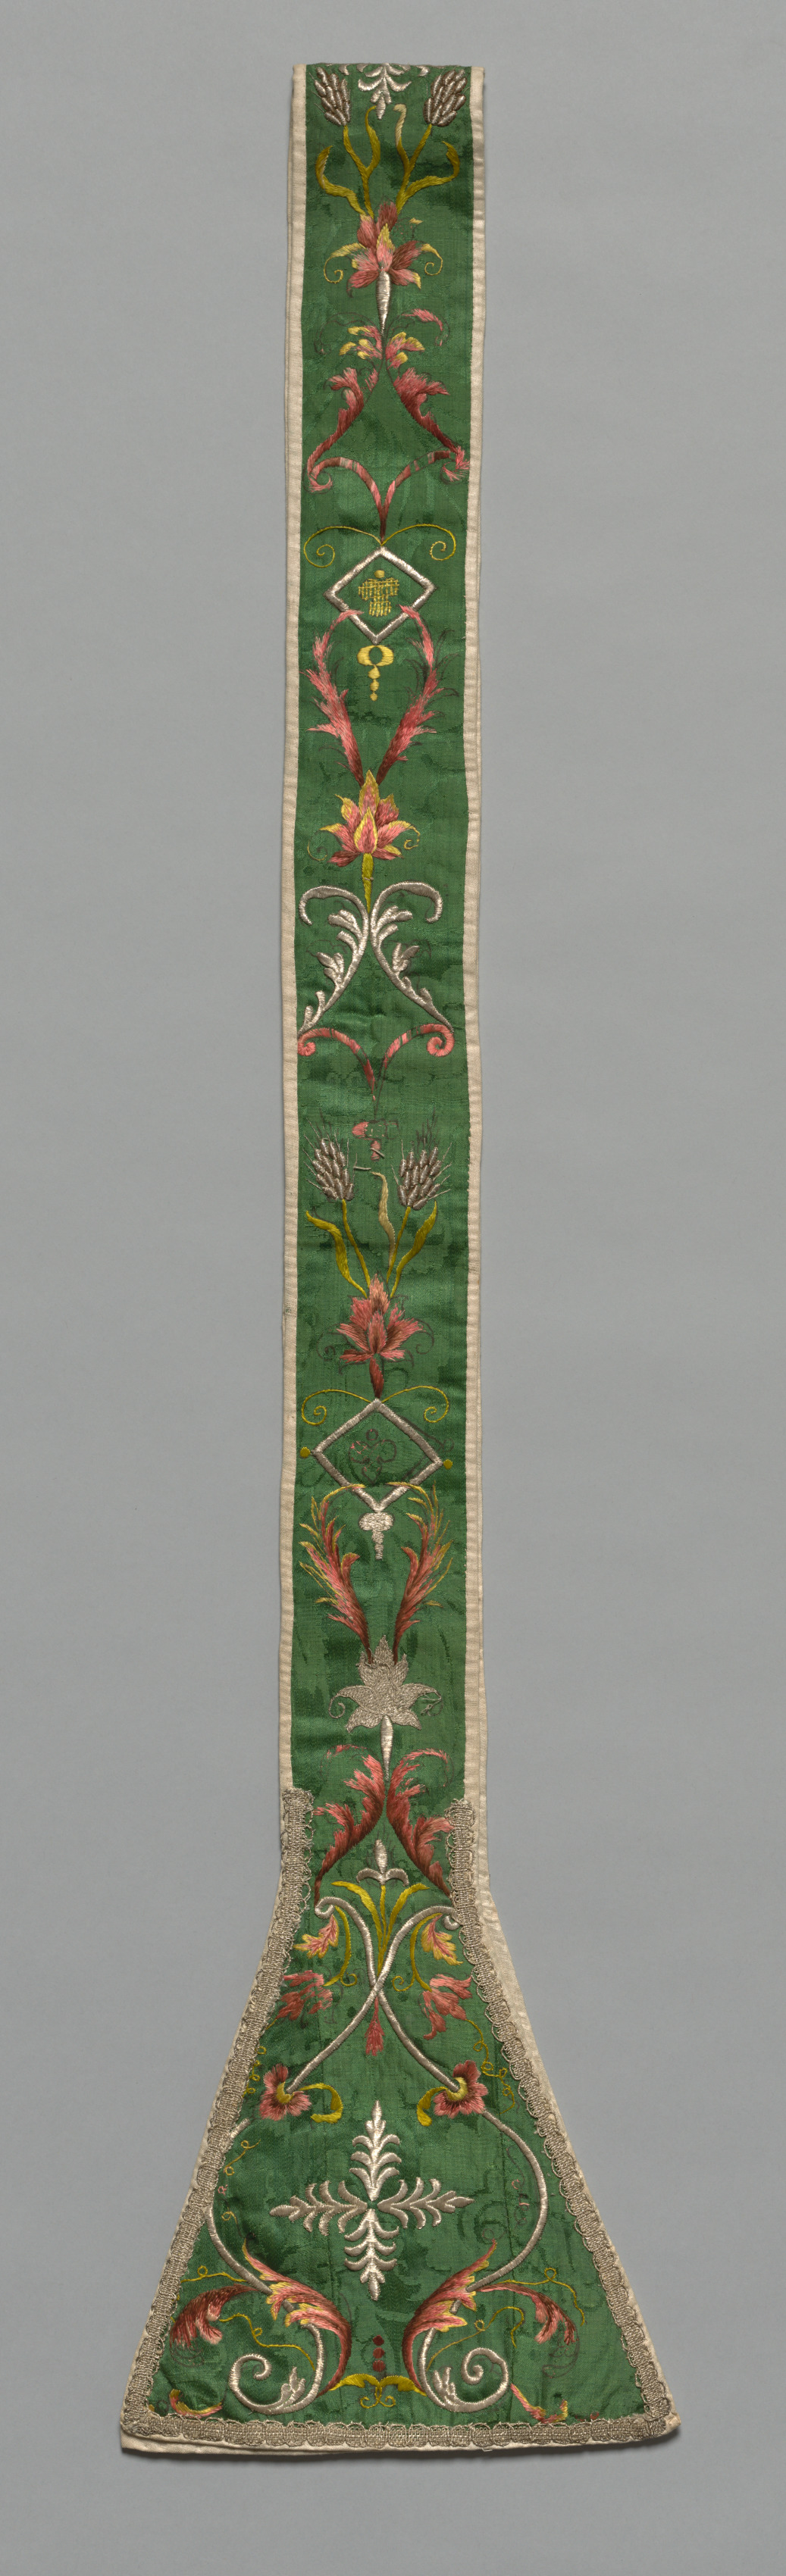 Embroidered Stola